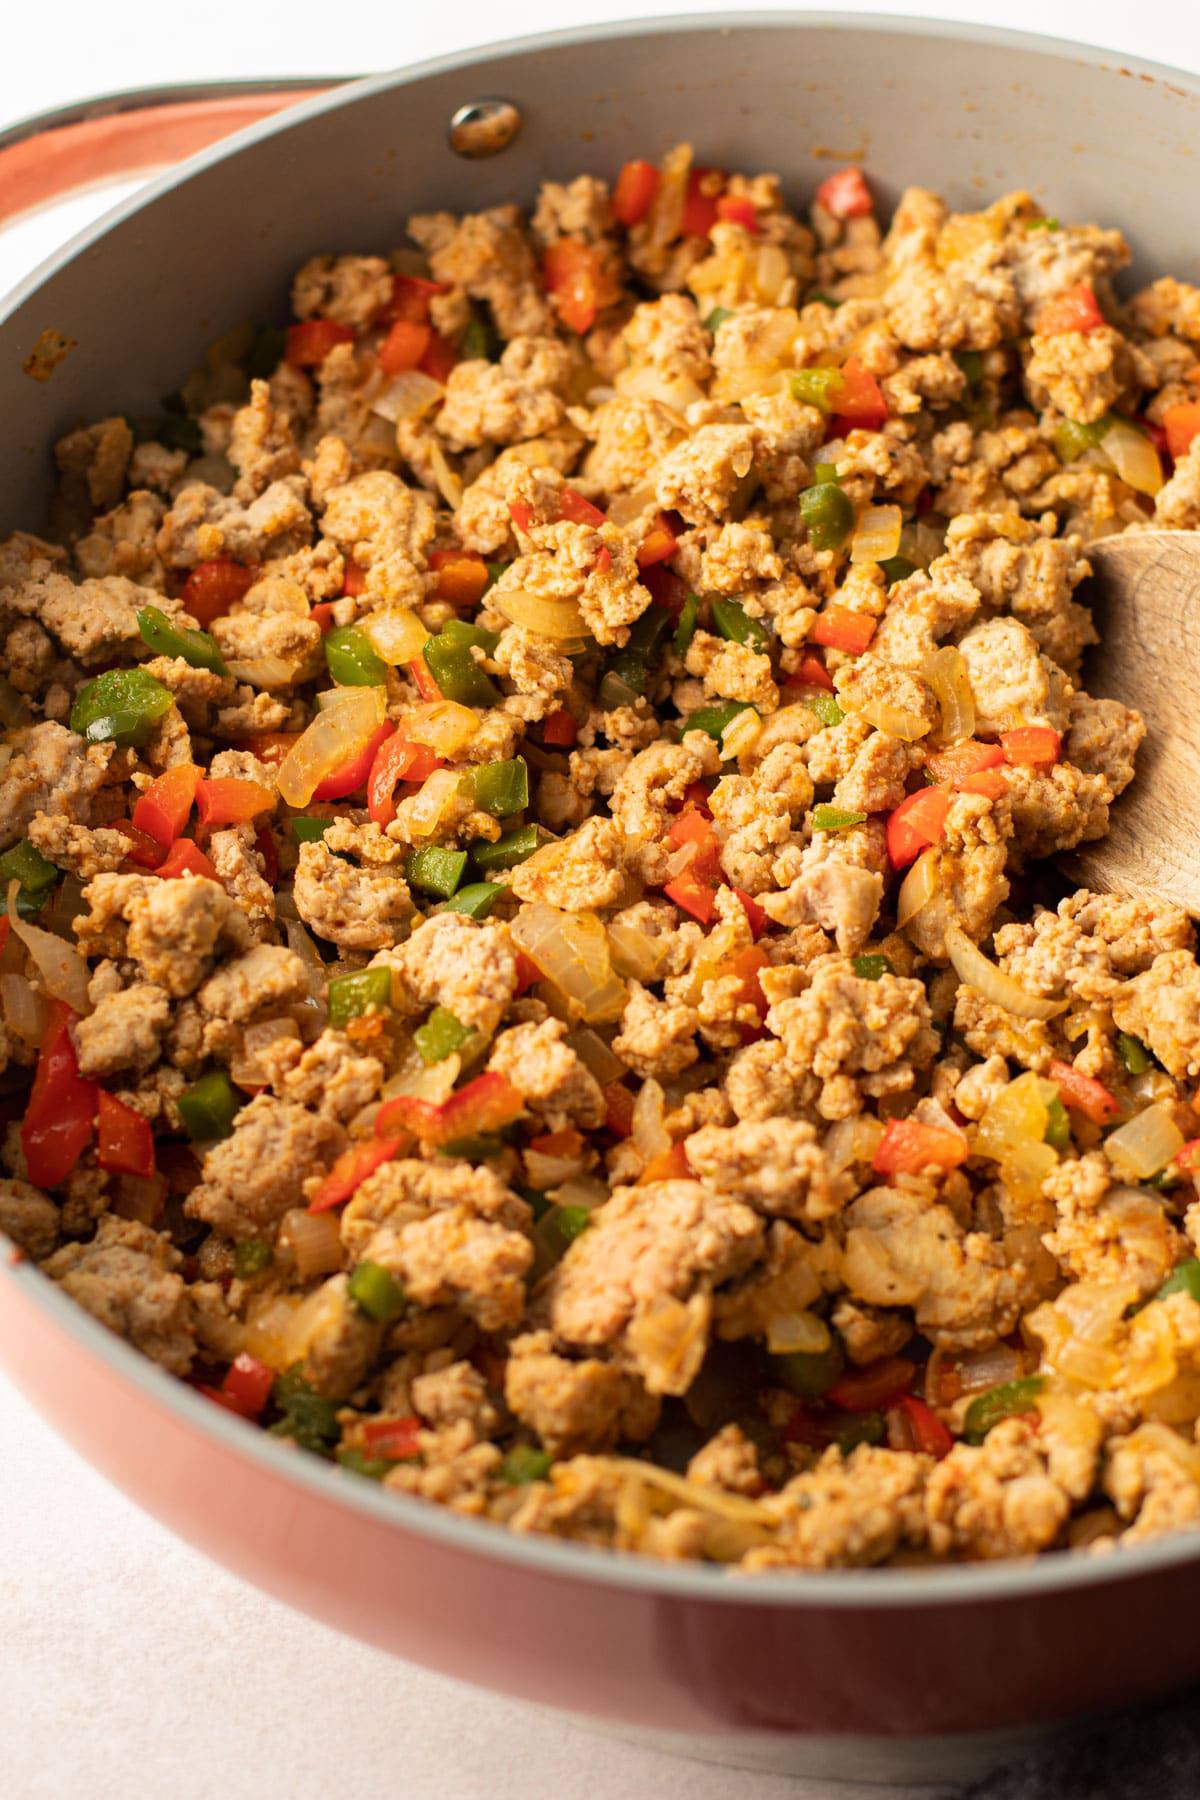 Ground turkey and veggies in a pan.